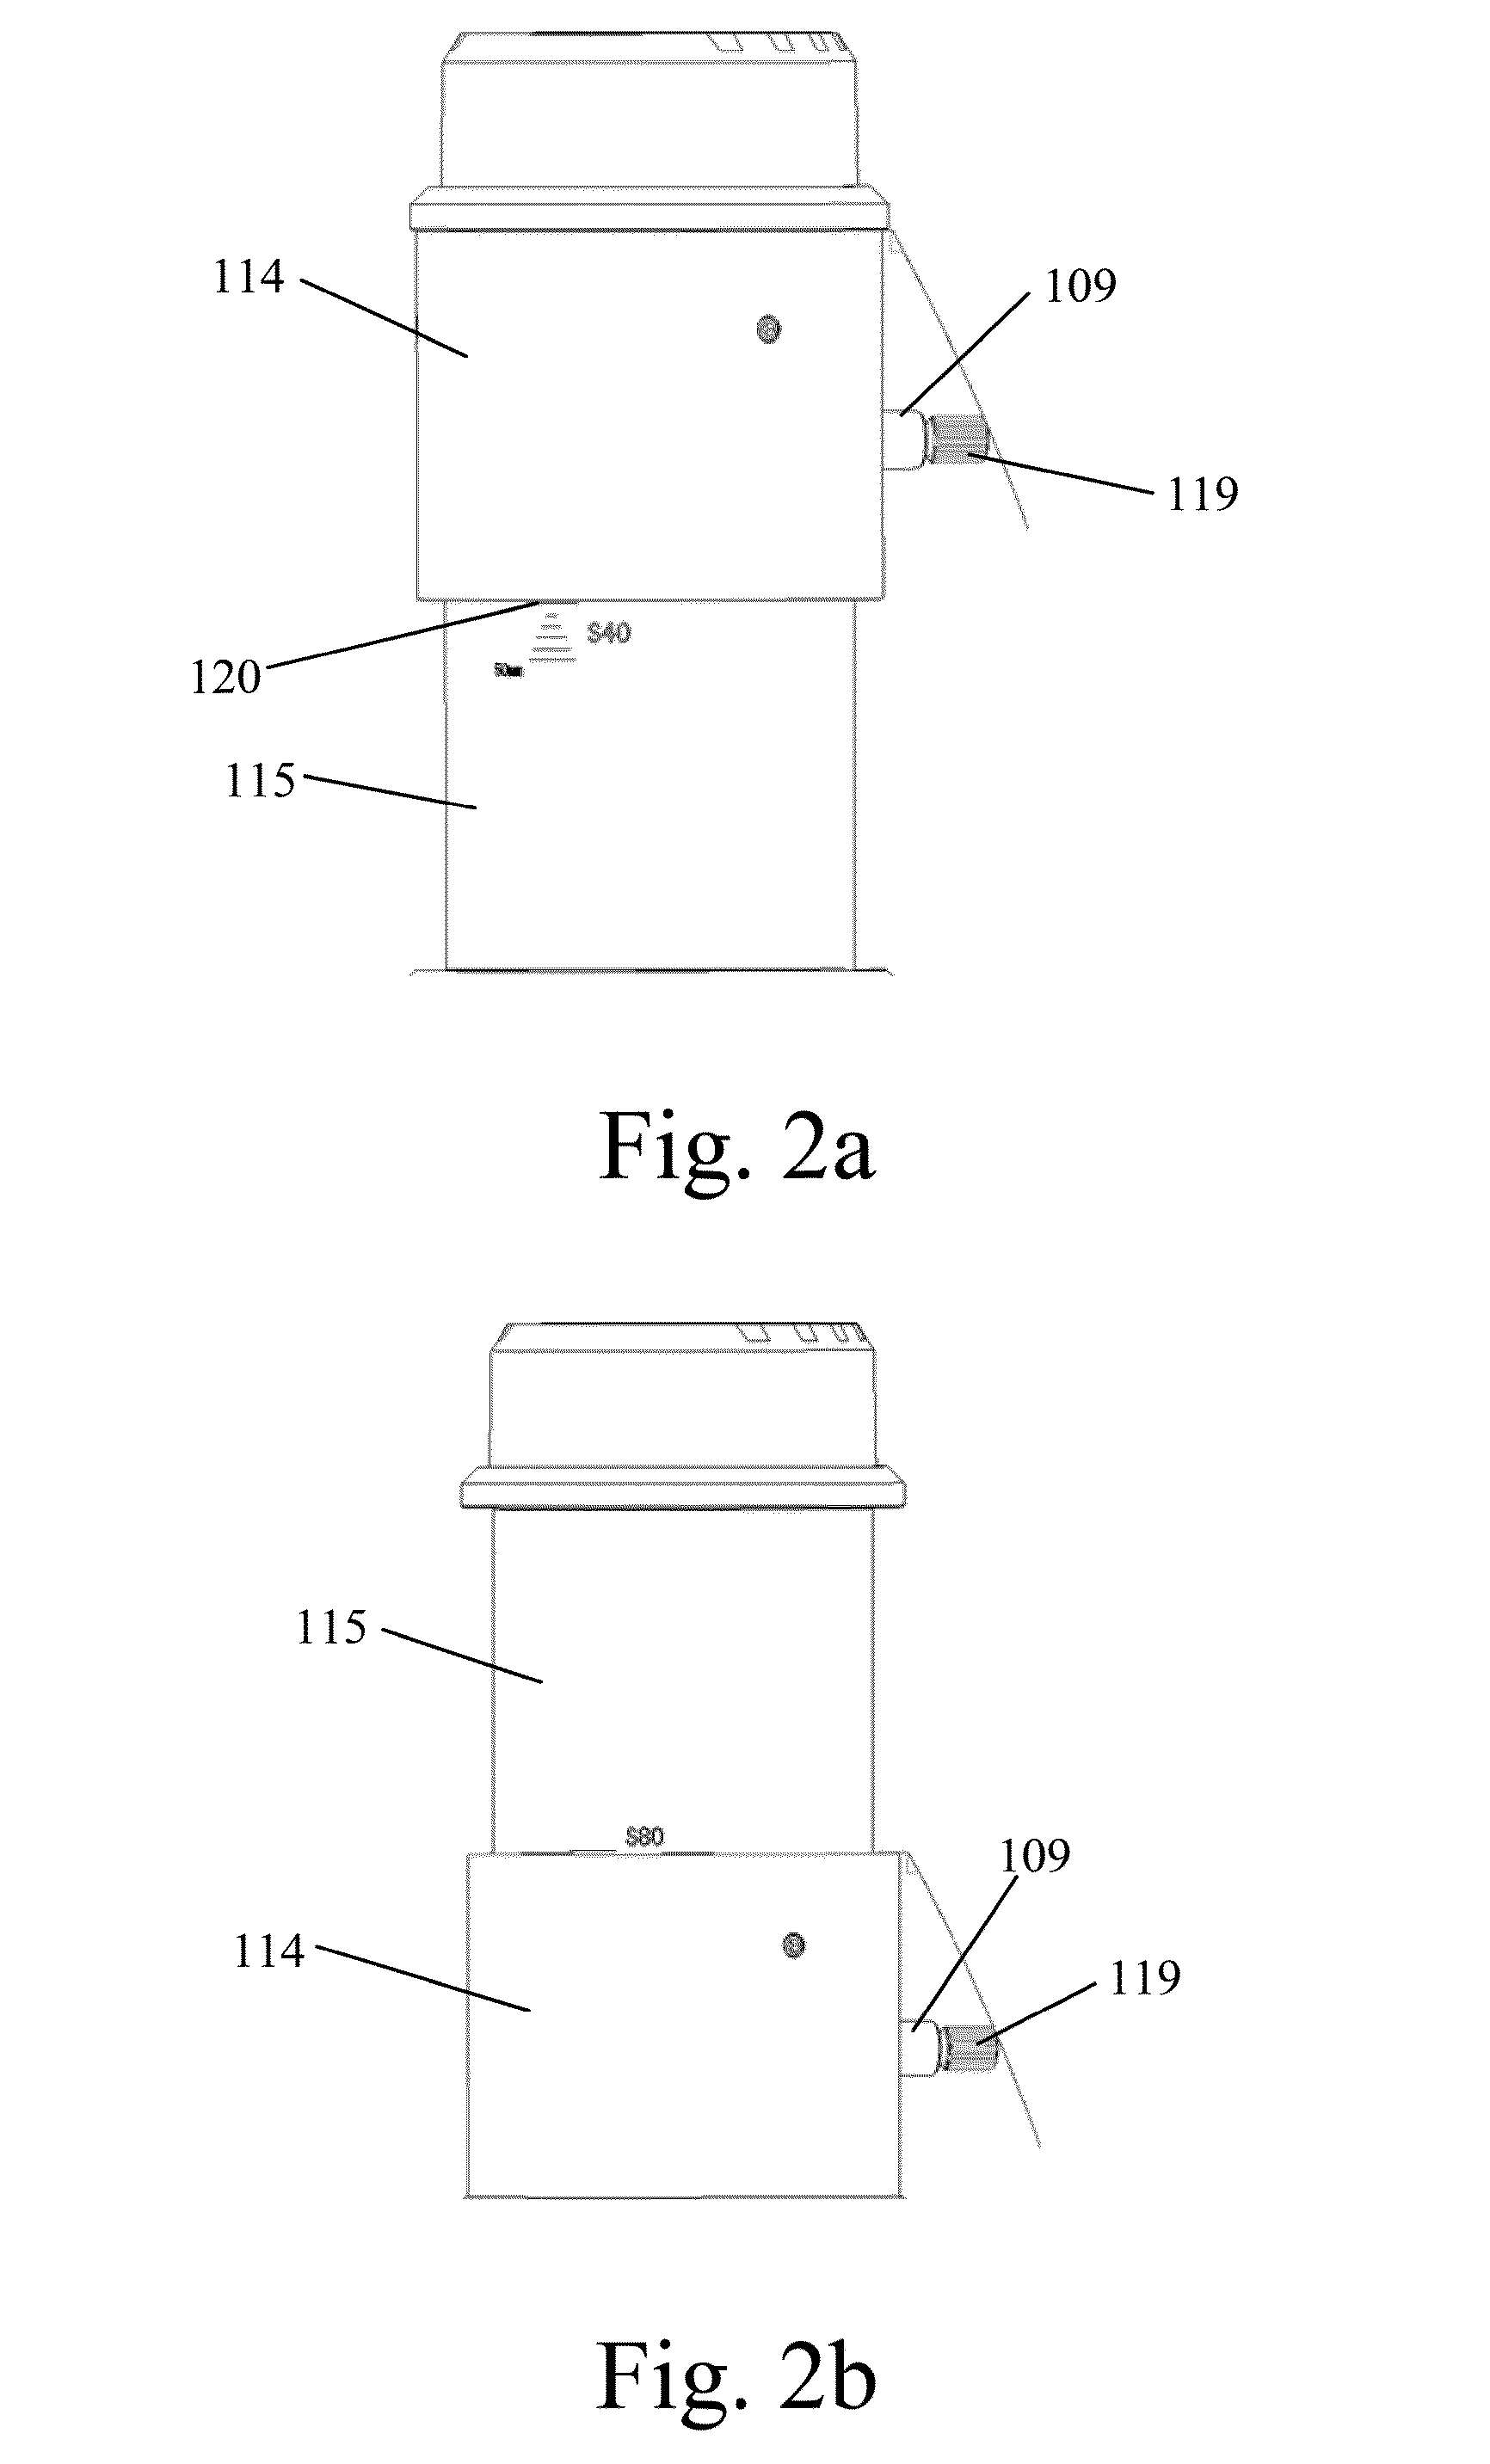 Adjusting device for an illumination component of a microscope, a microscope illumination device and a microscope